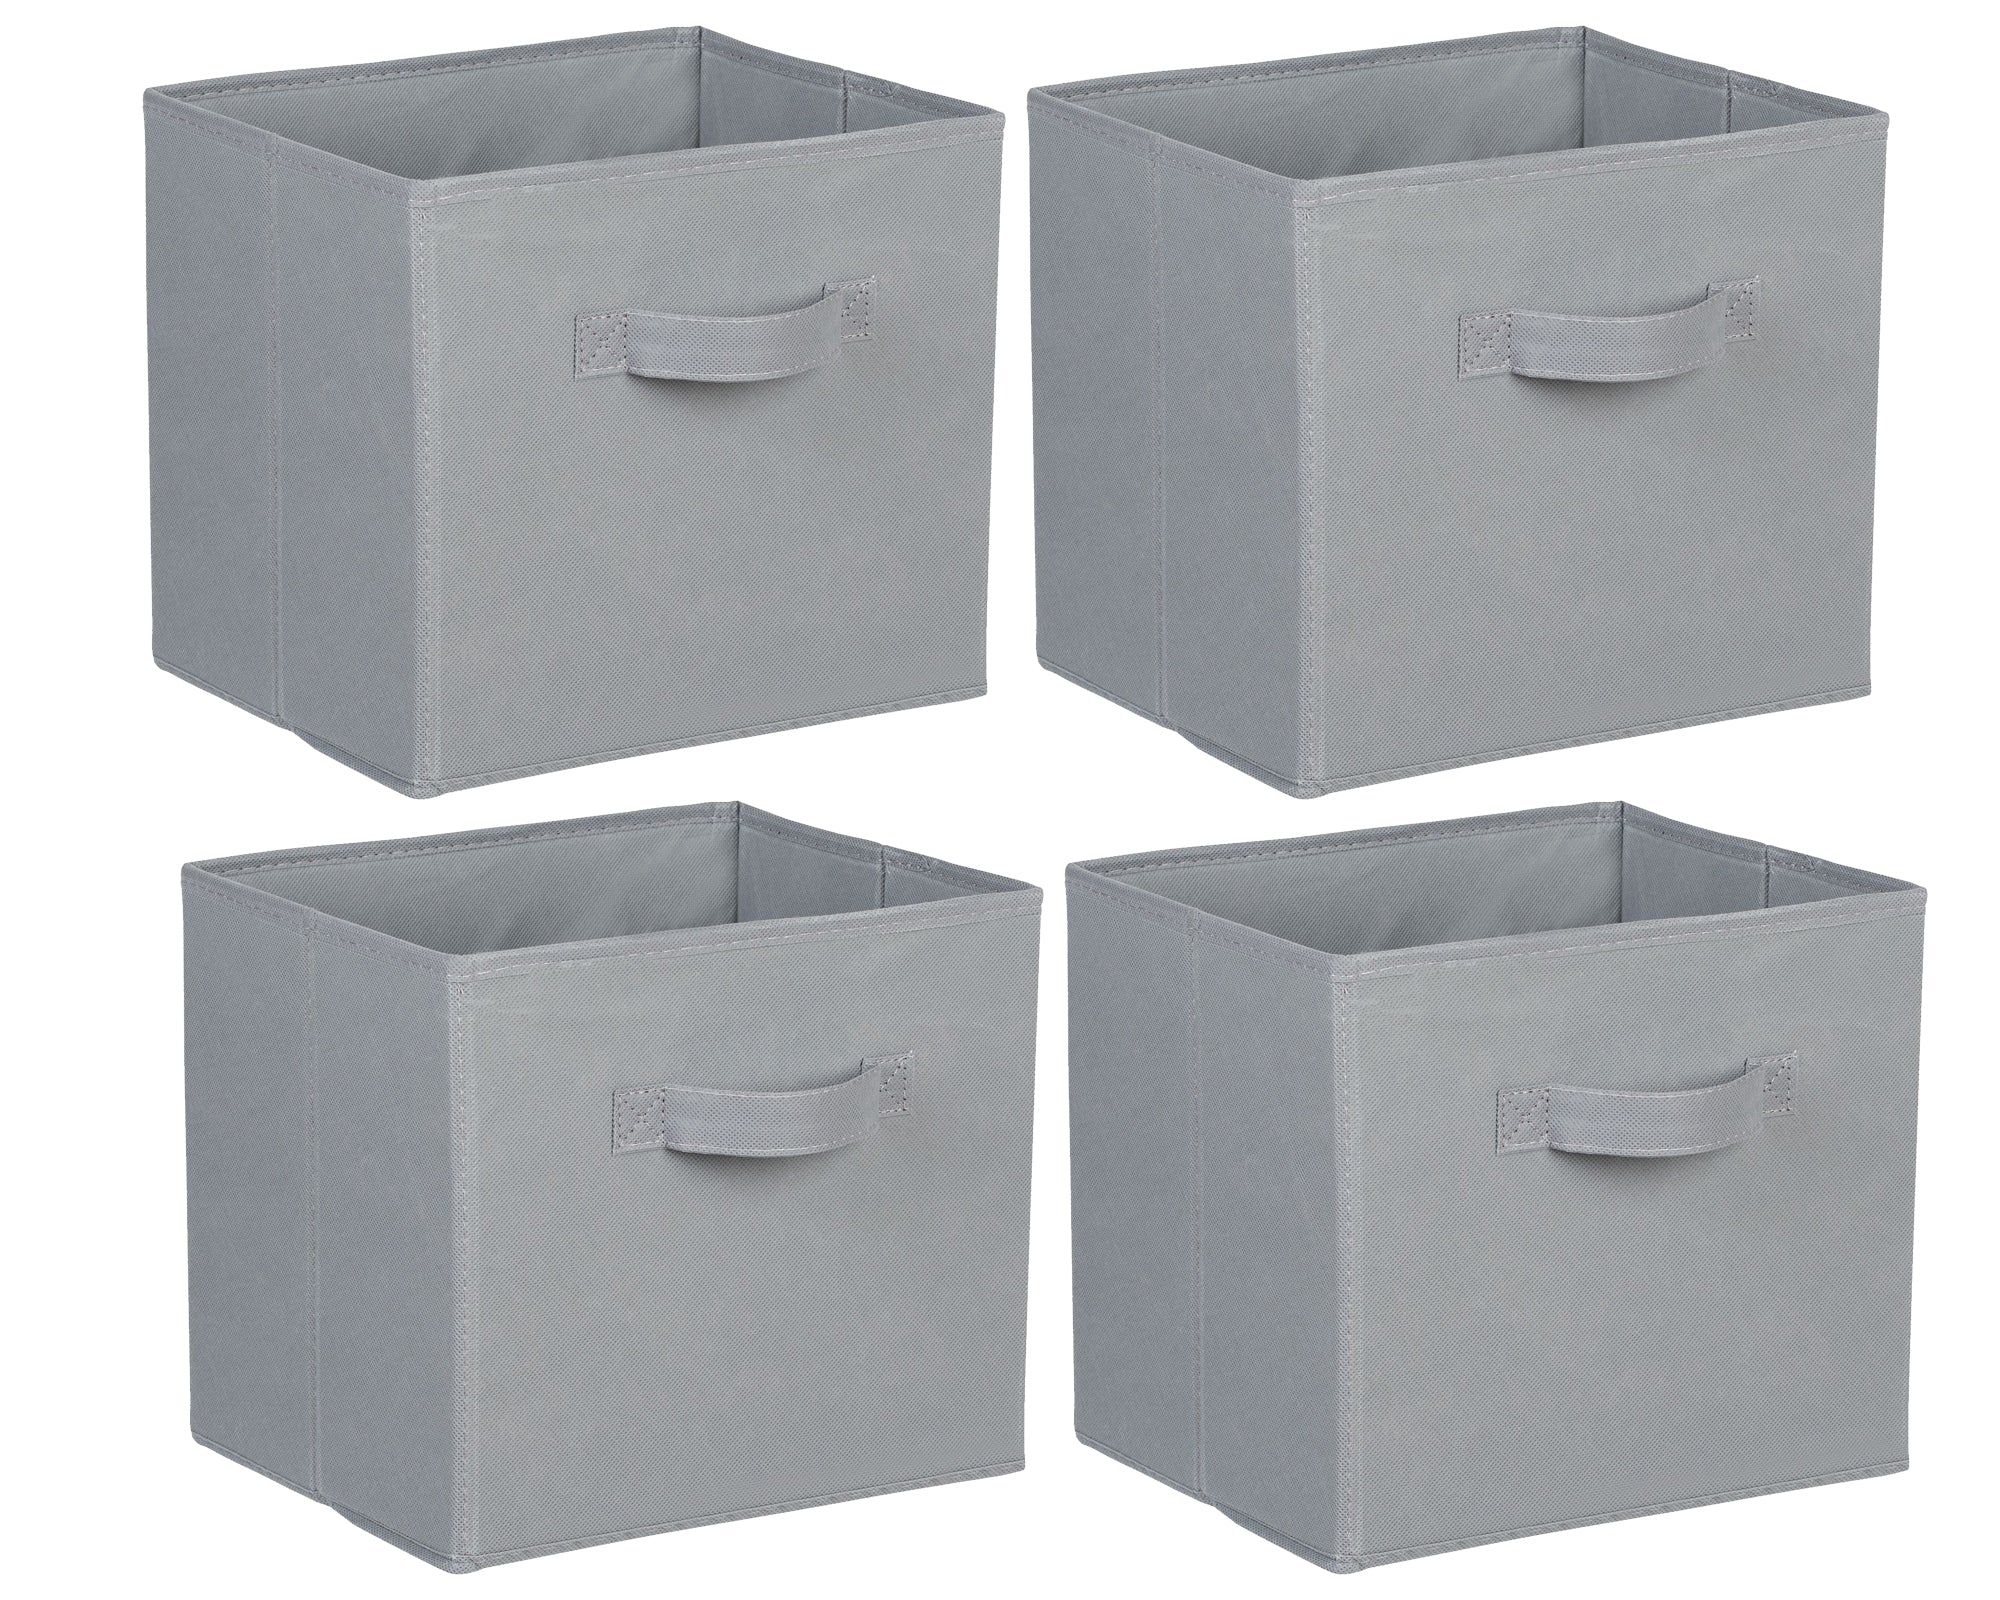 LMA Branded 4 Piece Collapsible Fabric Storage Cube Set